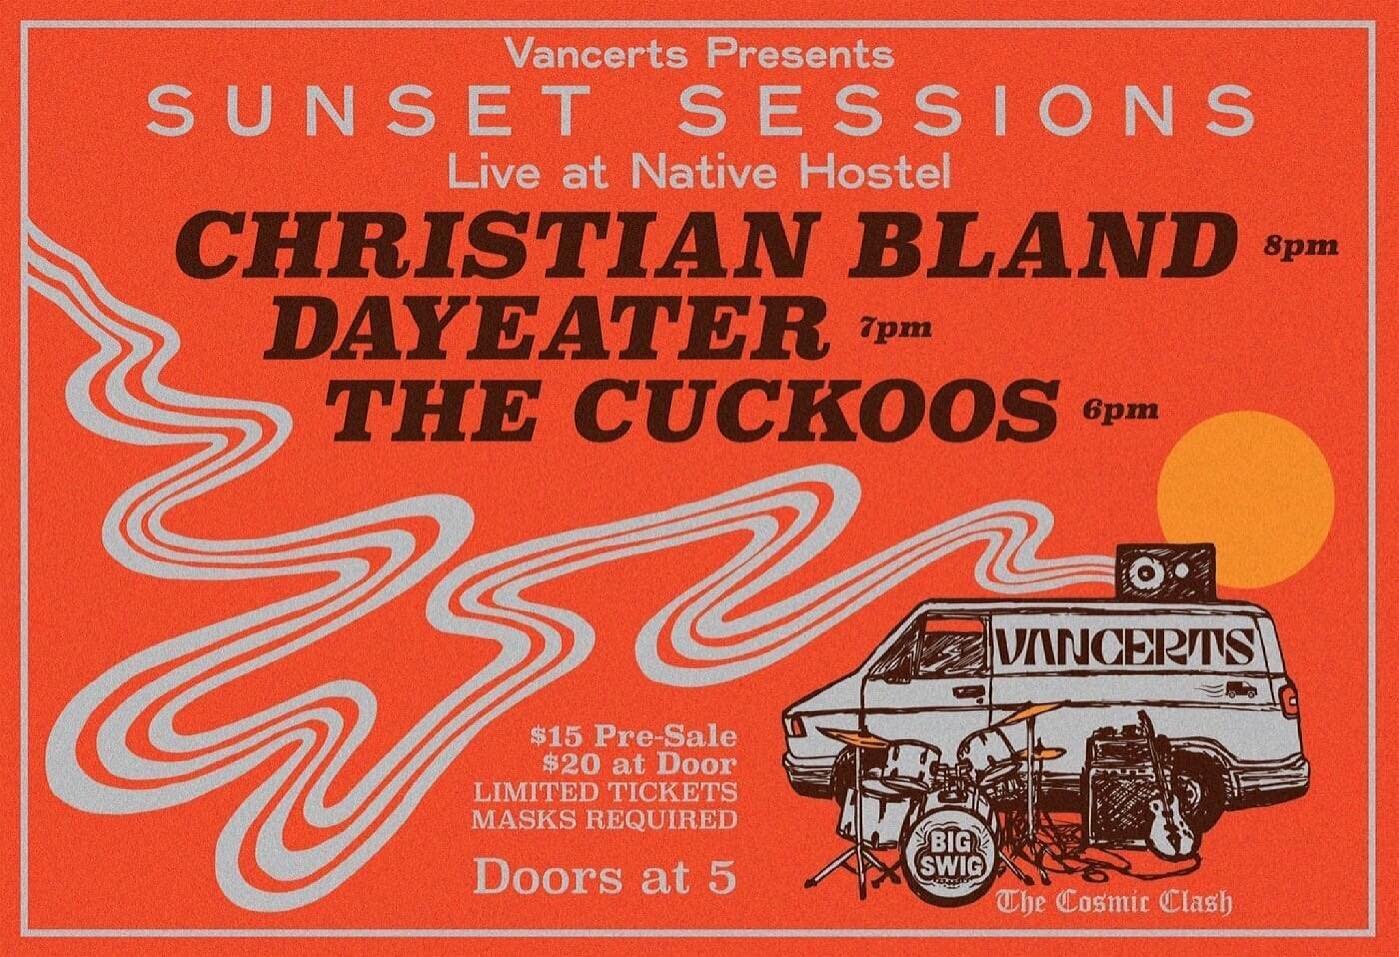 This Saturday! 🥀 Come out to @nativehostel to see my first solo set for @thecuckoos at 6pm! with @dayeaterband and @christianbland of @theblackangels 

Doors at 5pm $15 pre sale $20 at the door! 

Mask up! Be safe! And Come get groovy! 

Shoutout to